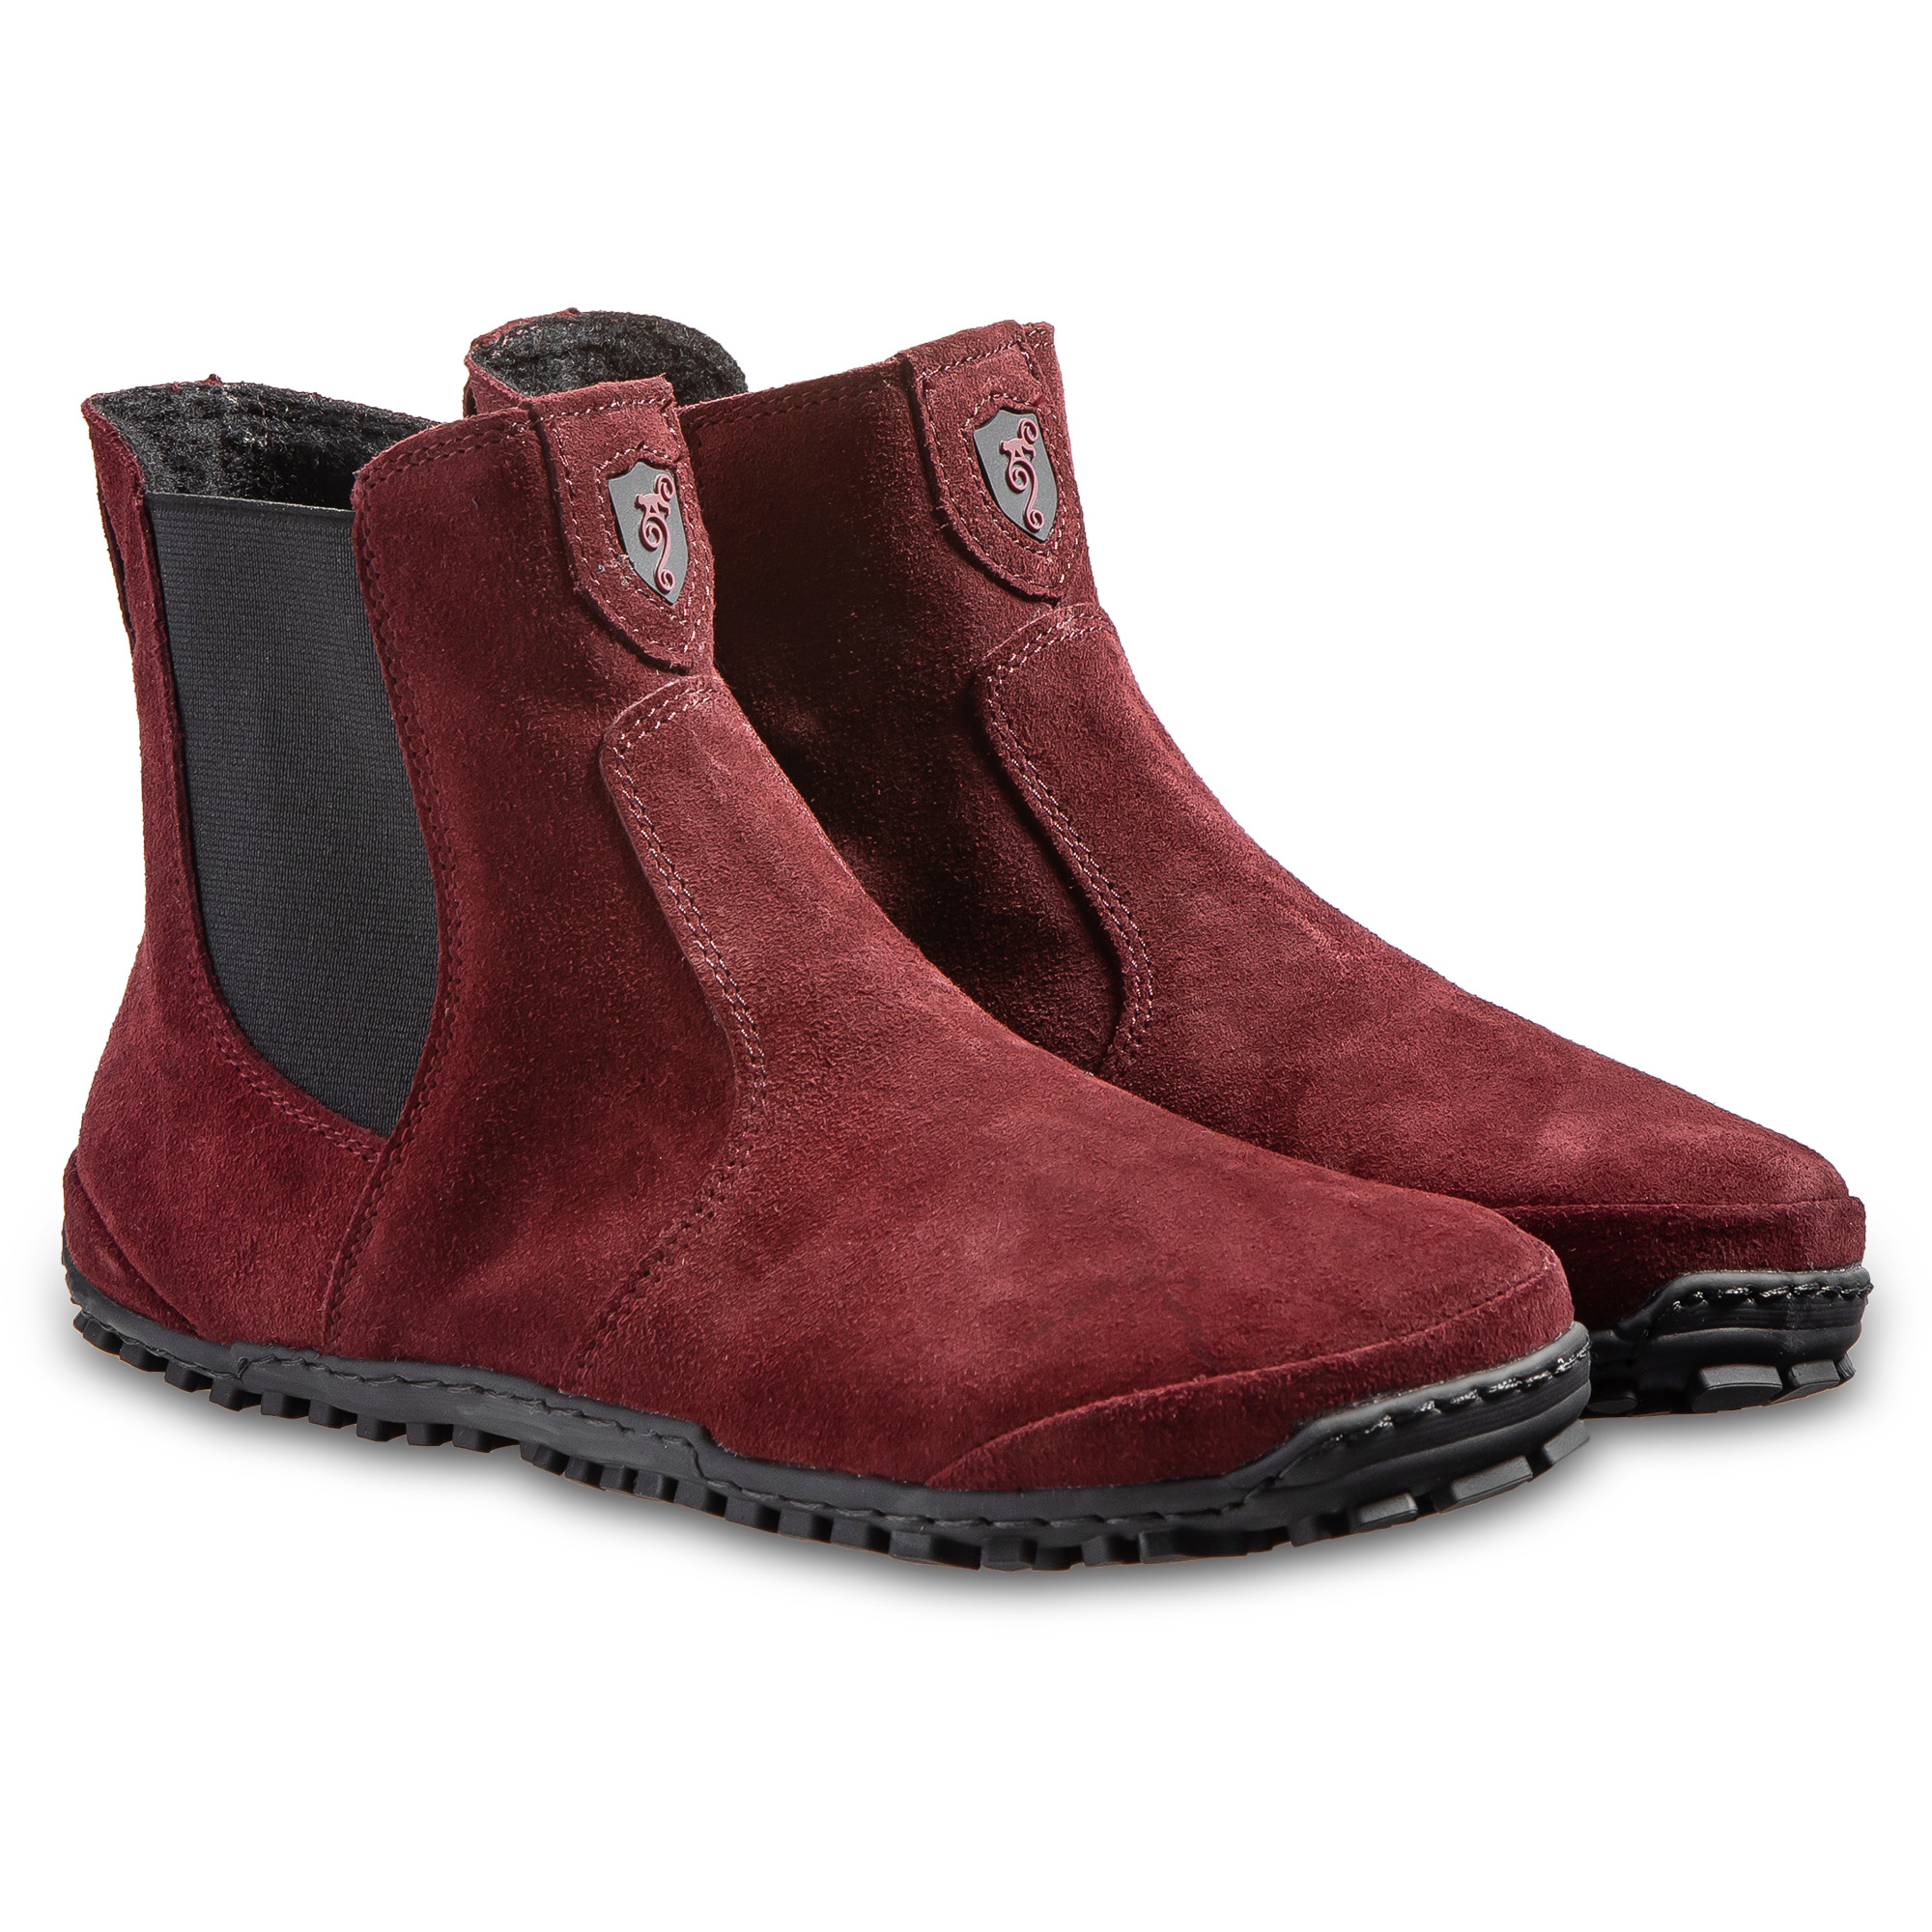 Suede chelsea boots - Magical Shoes Lupino Burgundy